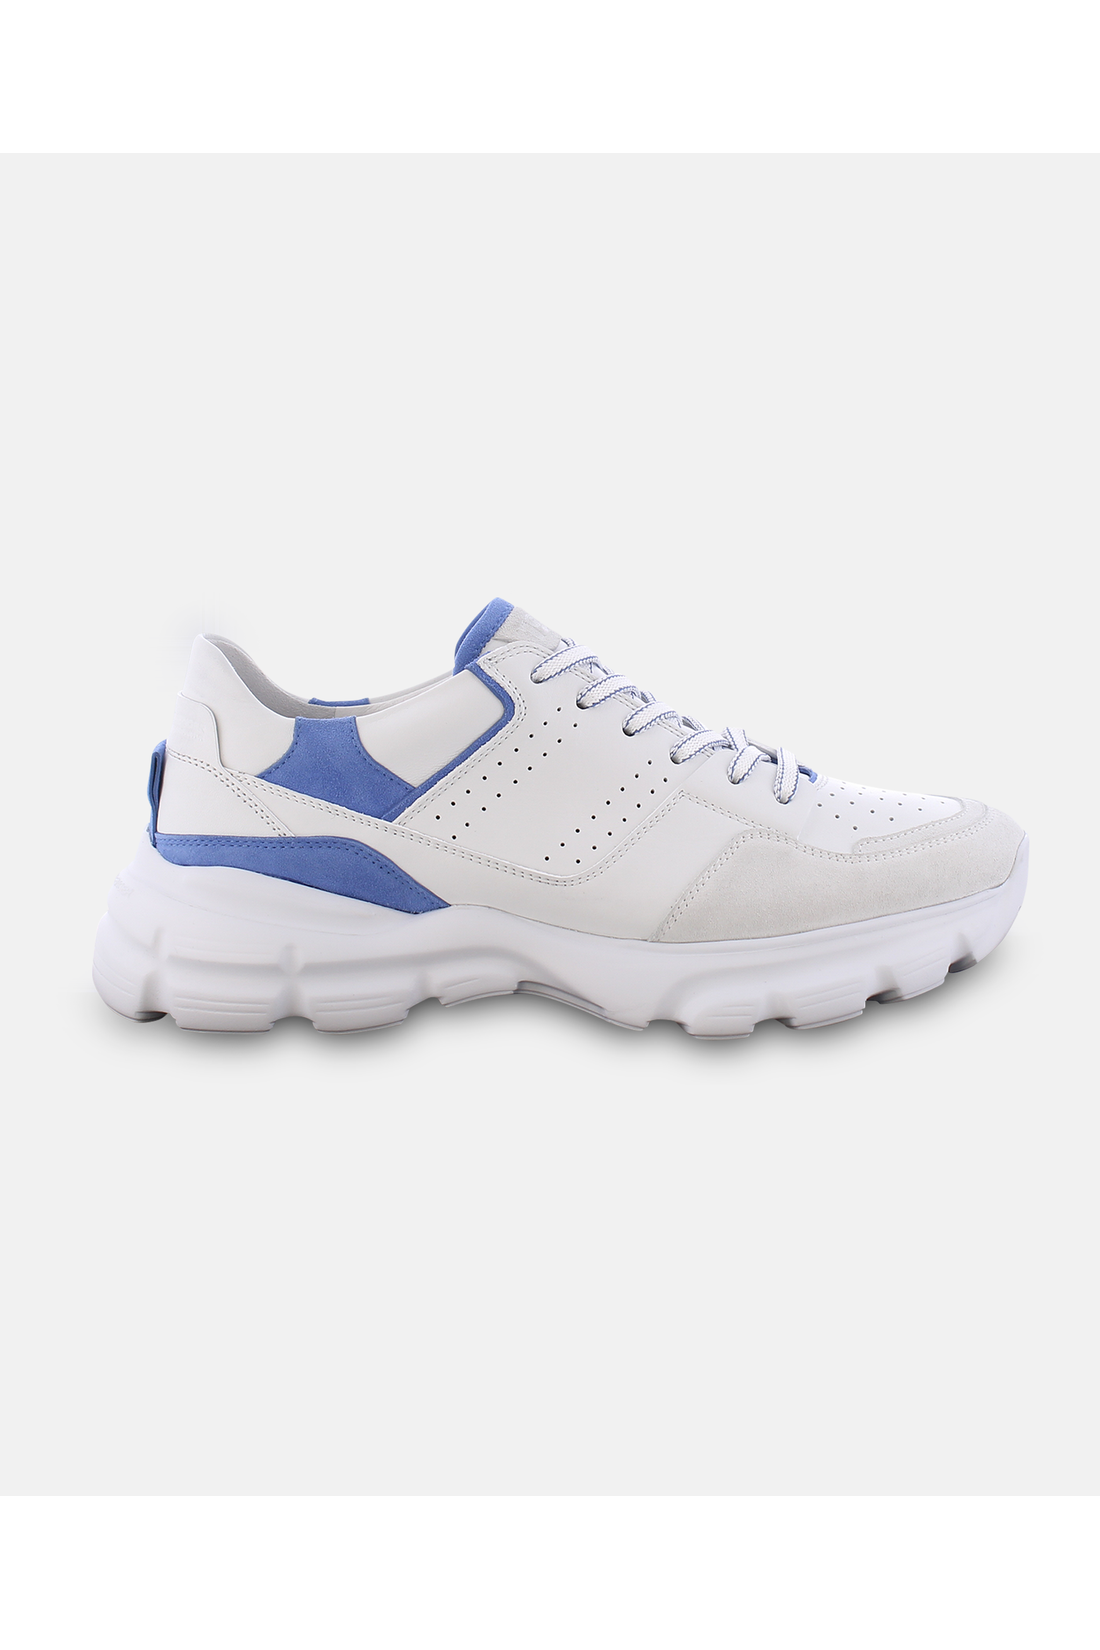 Kennel-Schmenger-OUTLET-SALE-FEVER-Sneakers-ARCHIVE-COLLECTION-3_36837563-f0ed-44fe-be21-f04fada5b460.png